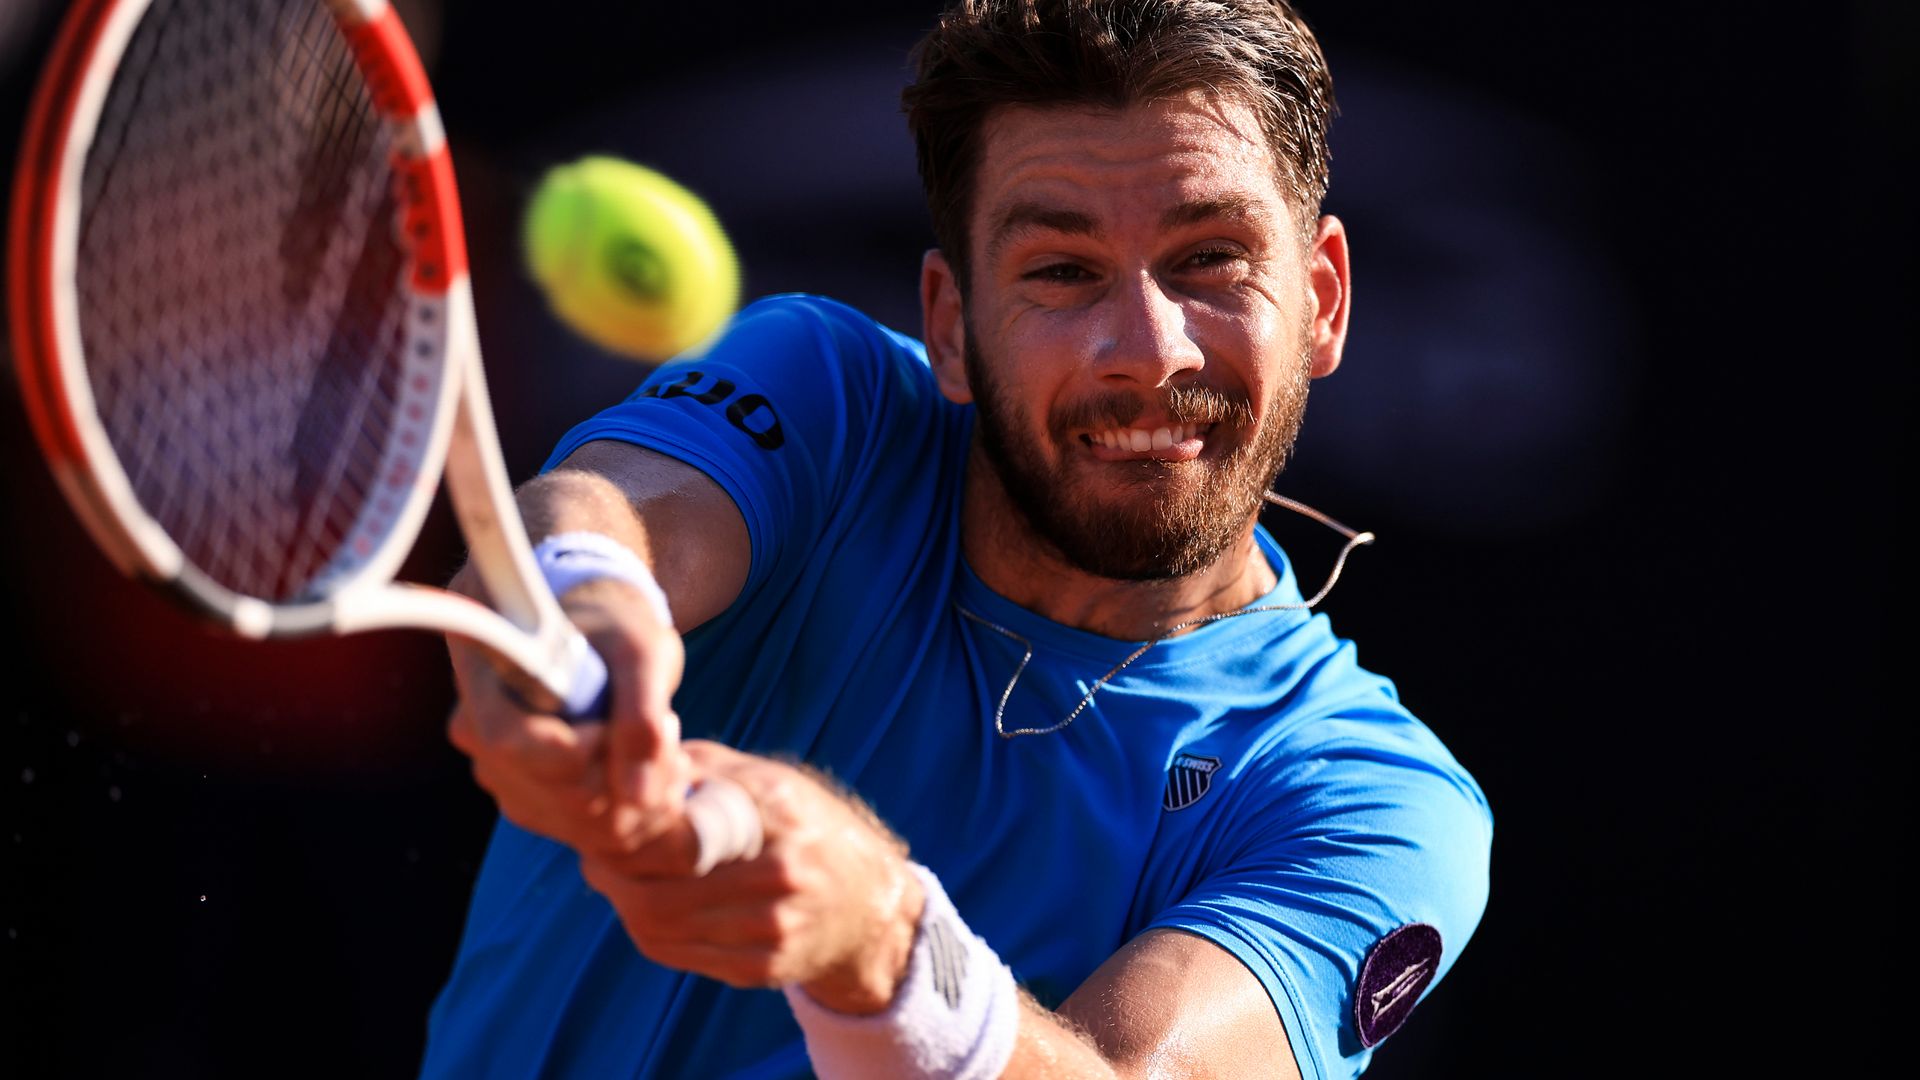 Norrie to face Alcaraz in Rio Open final after battling past Zapata Miralles